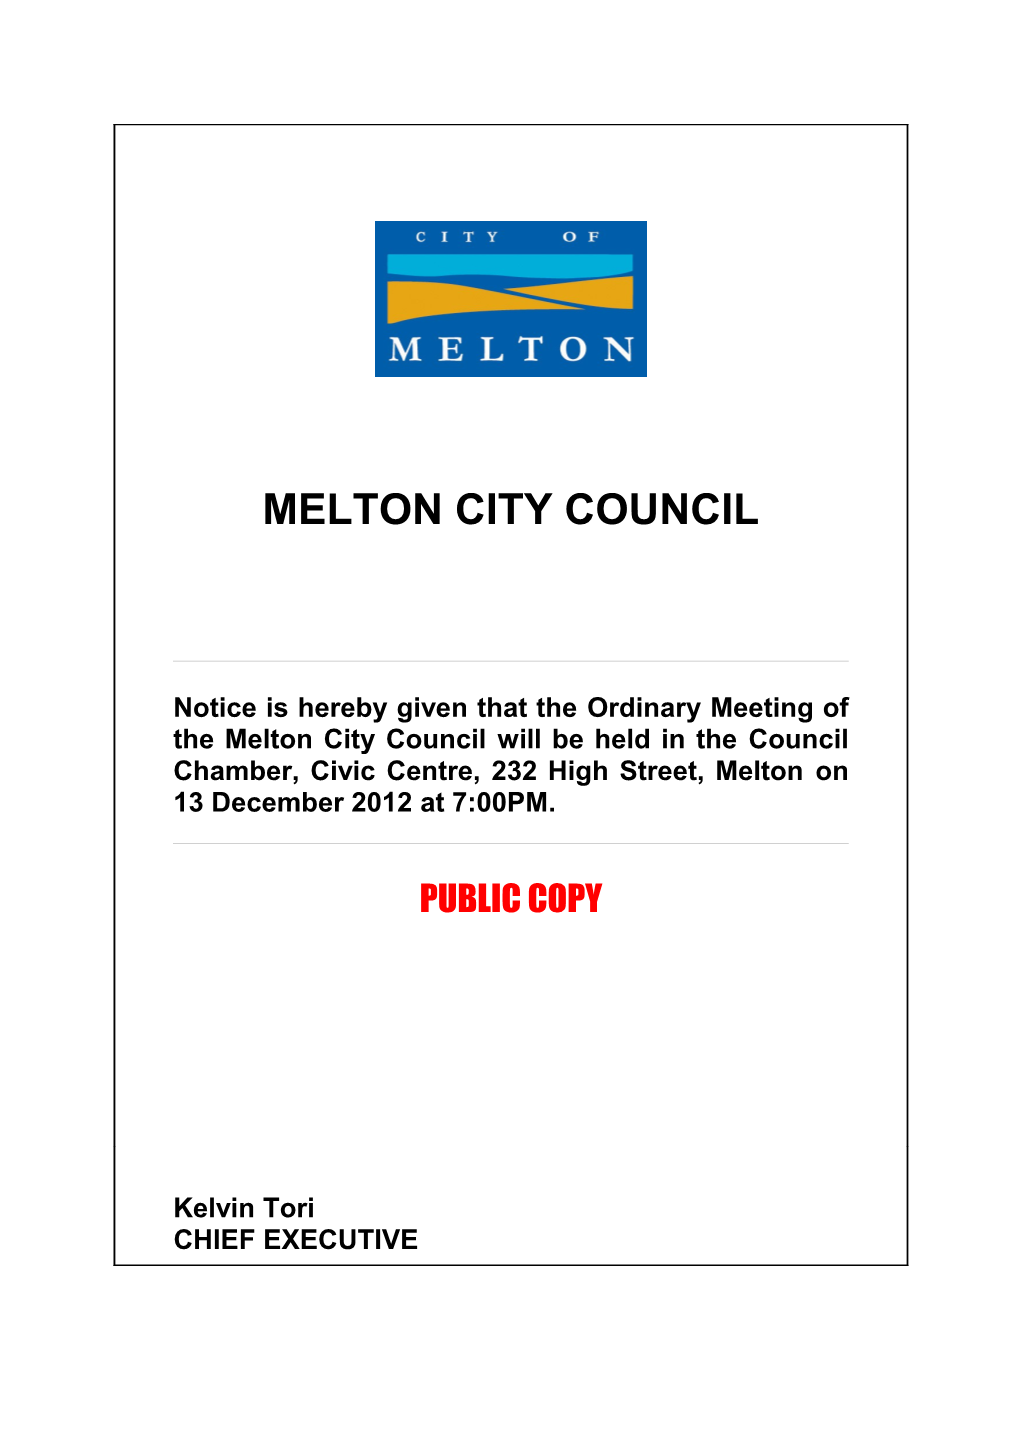 Agenda of Ordinary Meeting of Council - 13 December 2012